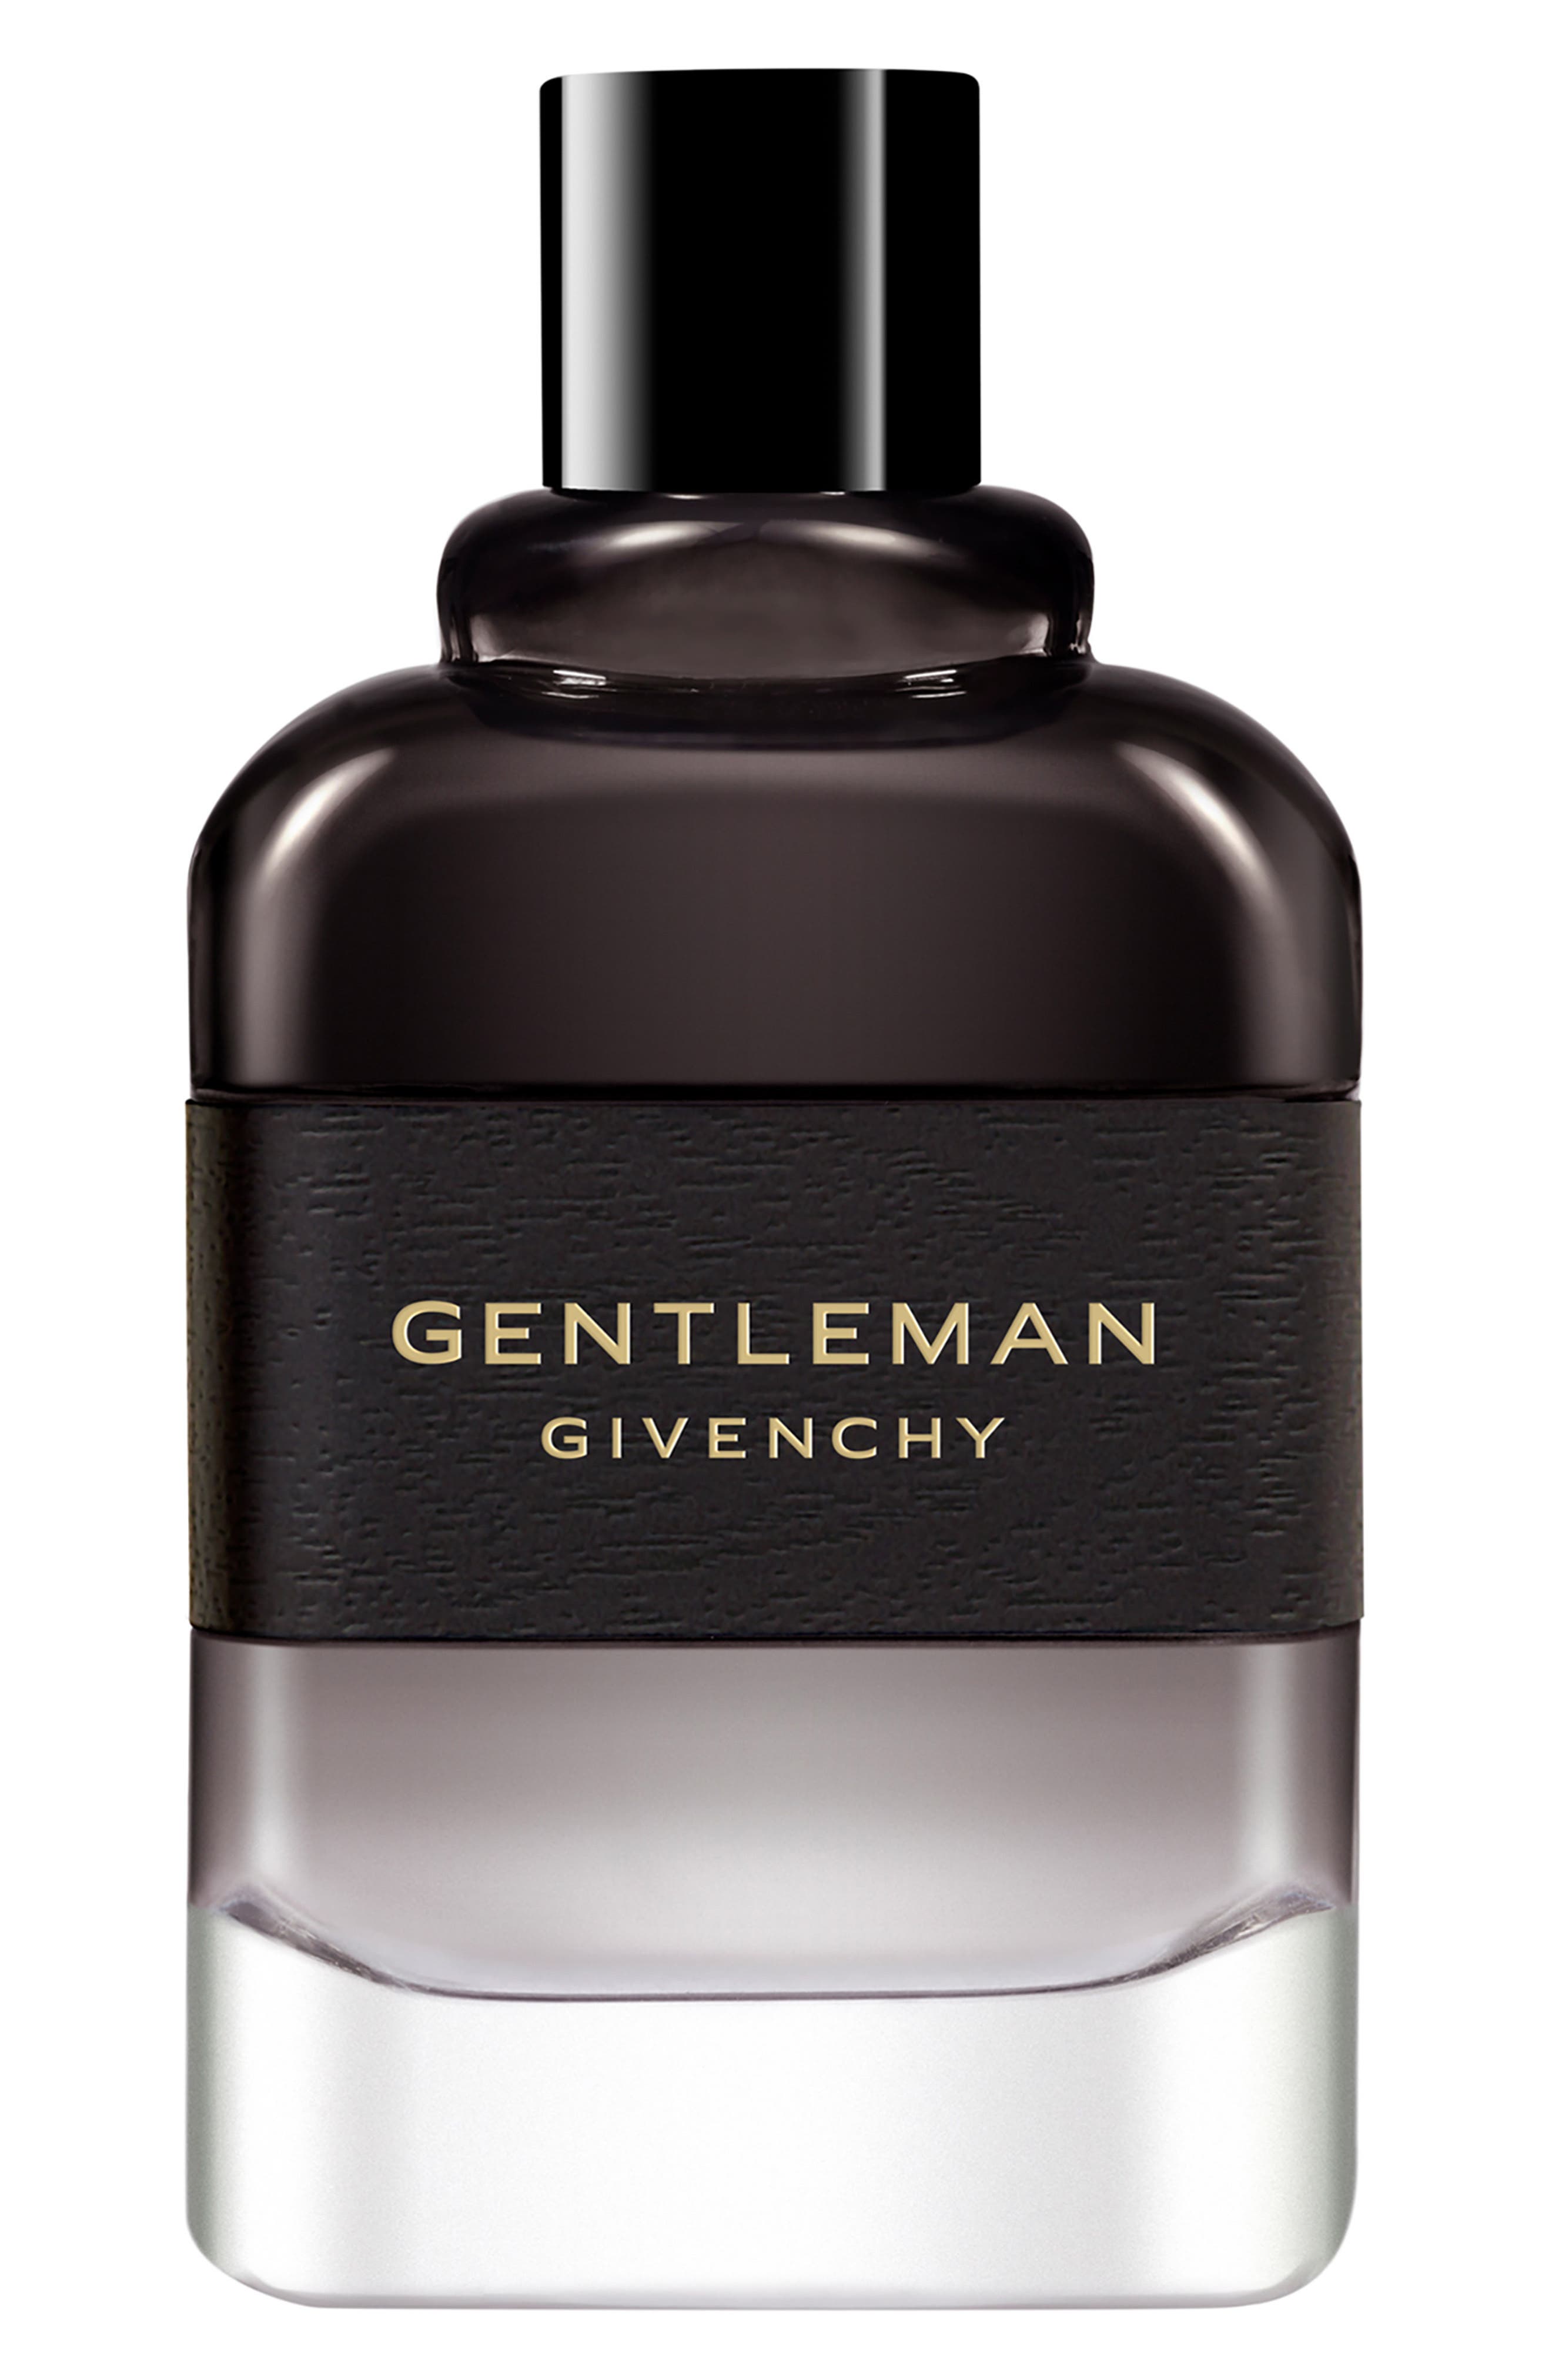 best givenchy cologne